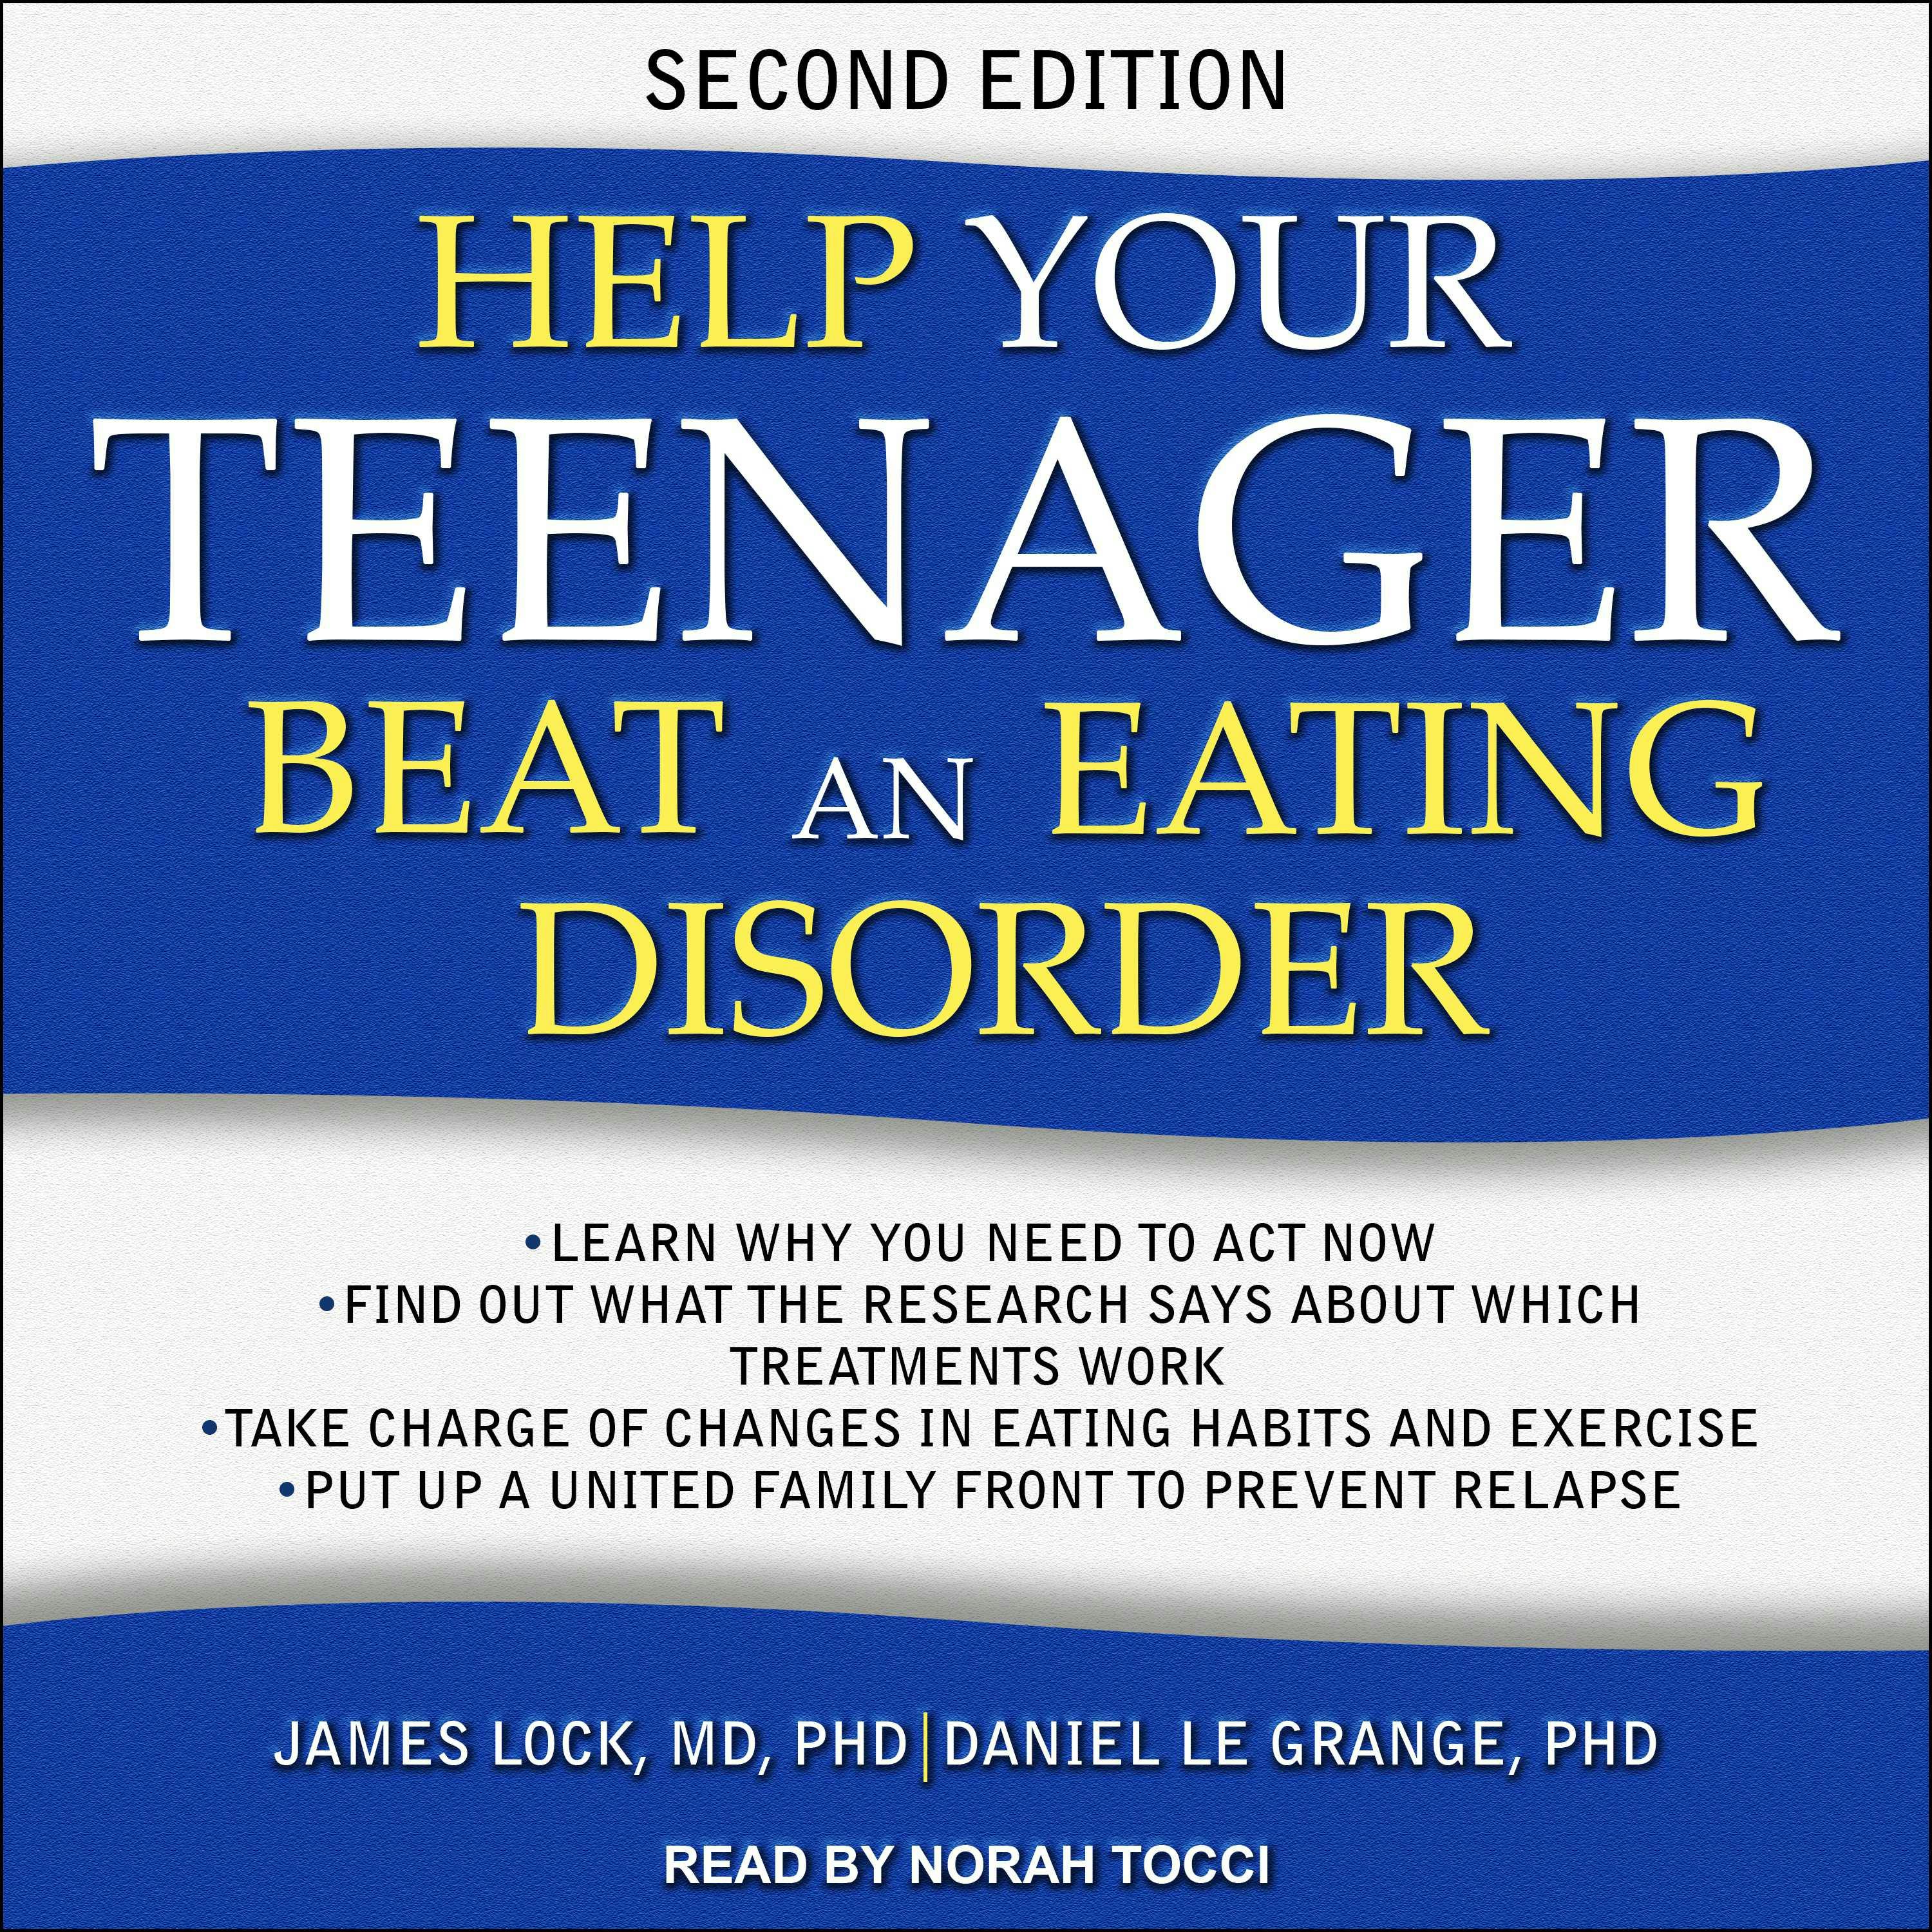 Help Your Teenager Beat an Eating Disorder, Second Edition - PhD